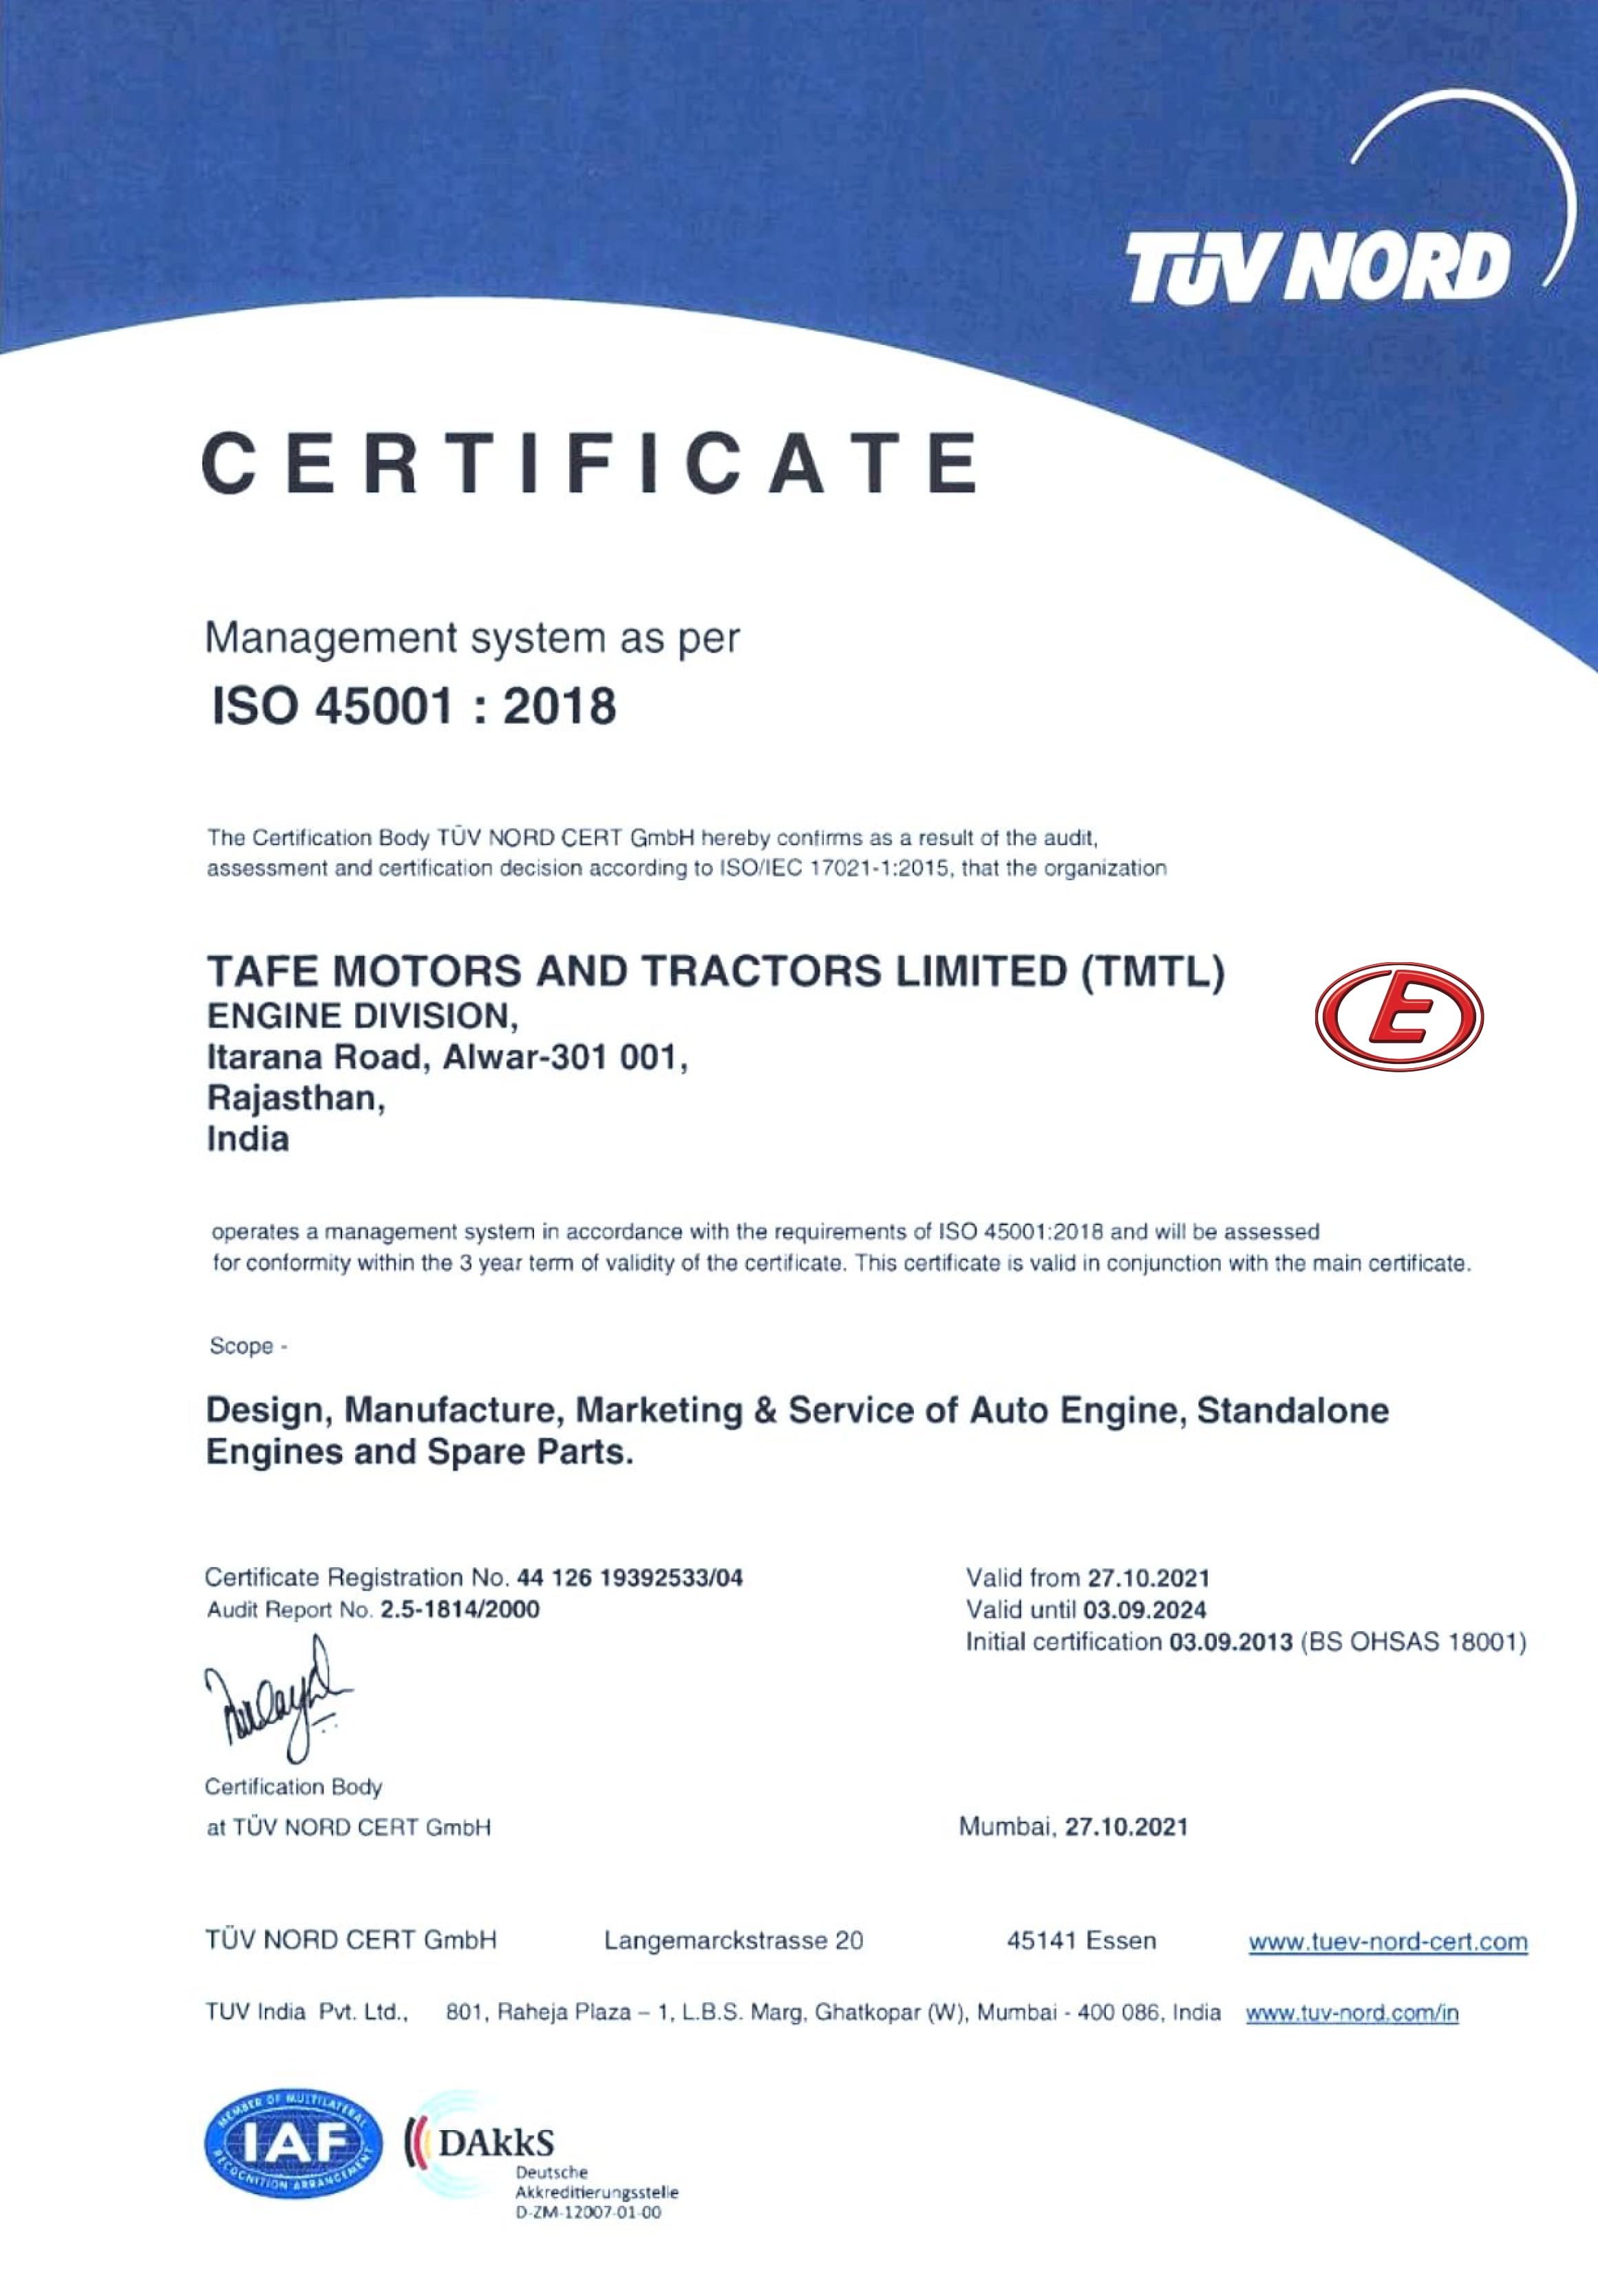 Tafe power ISO 45001 certified for Industrial Engine